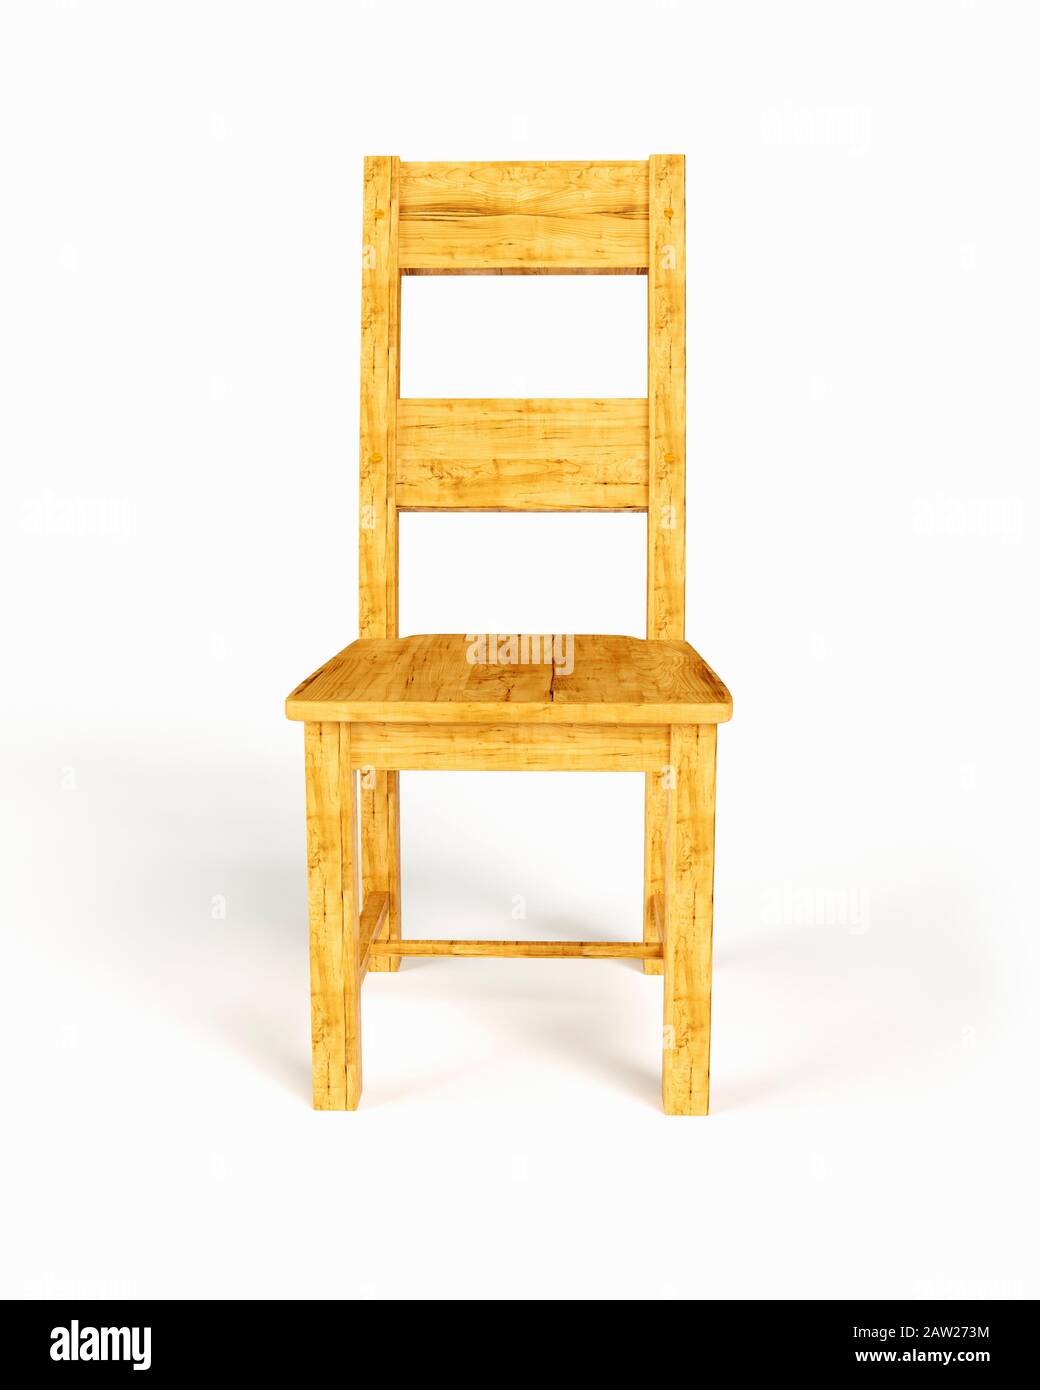 Wooden dining chair on a white background Stock Photo